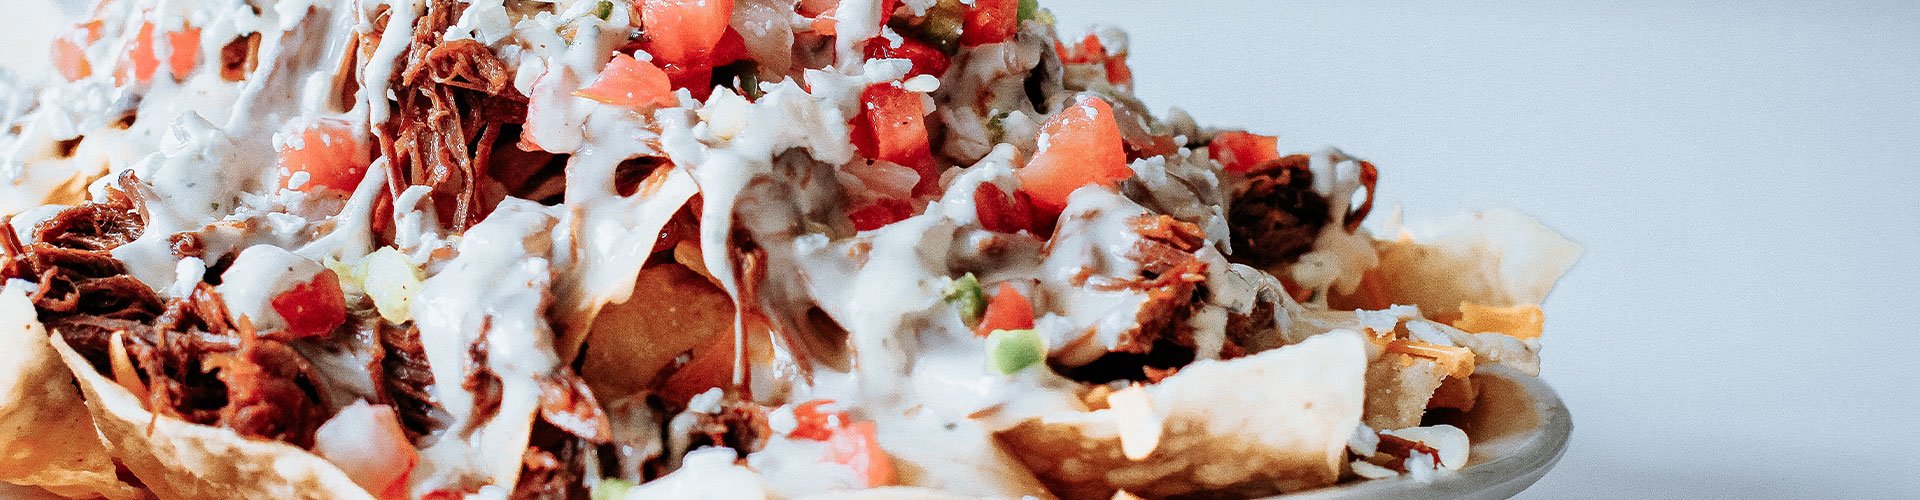 Fuzzy's nachos with pork and queso